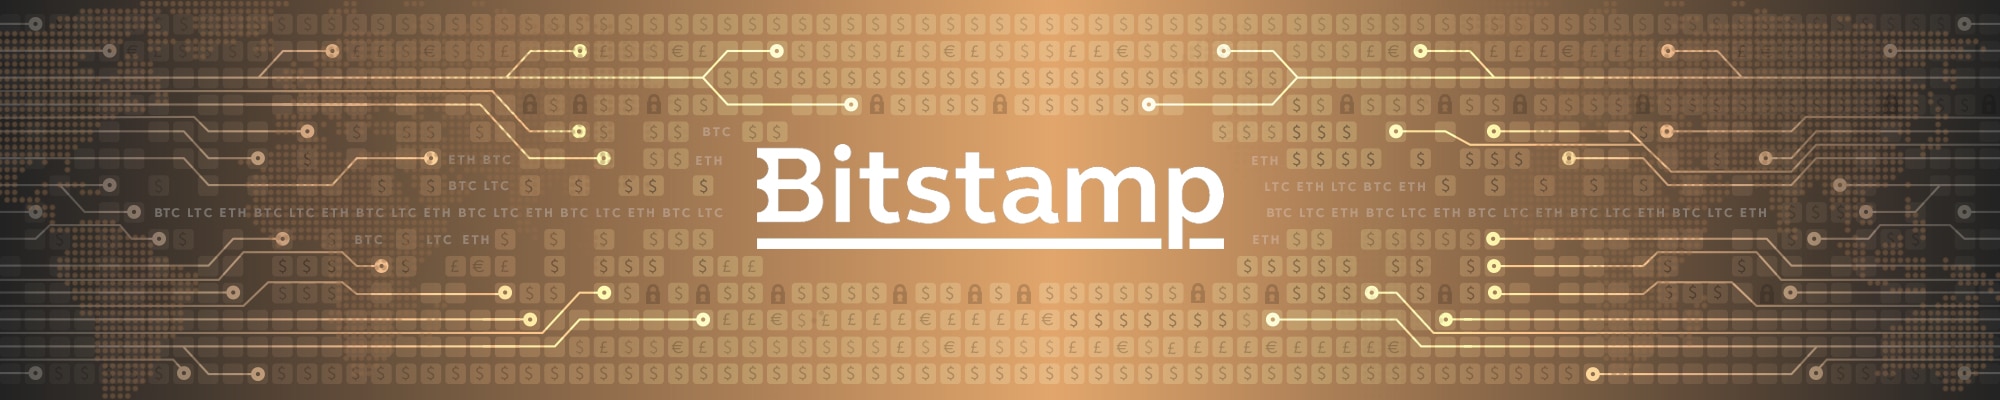 how to download key on bitstamp to store ripple